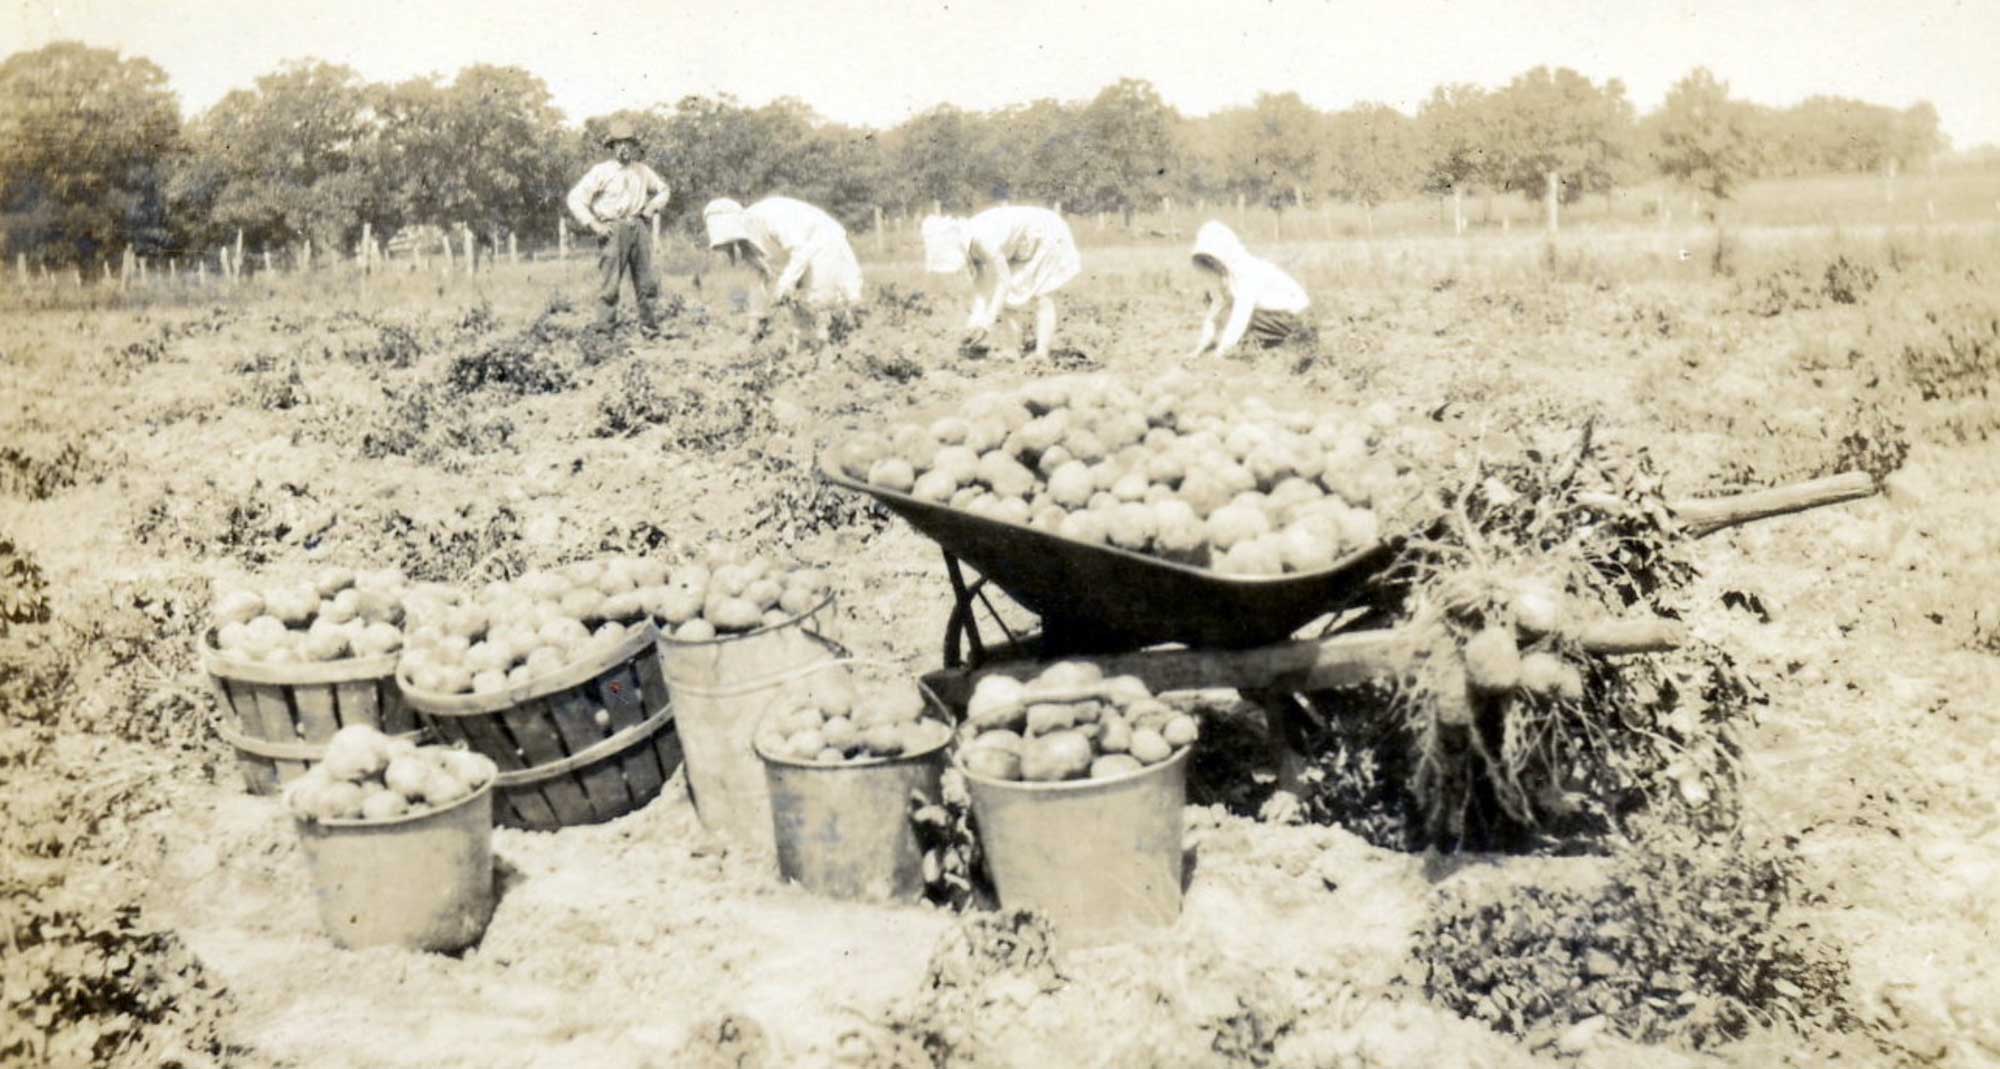 The Fridels working a potato field on their farm